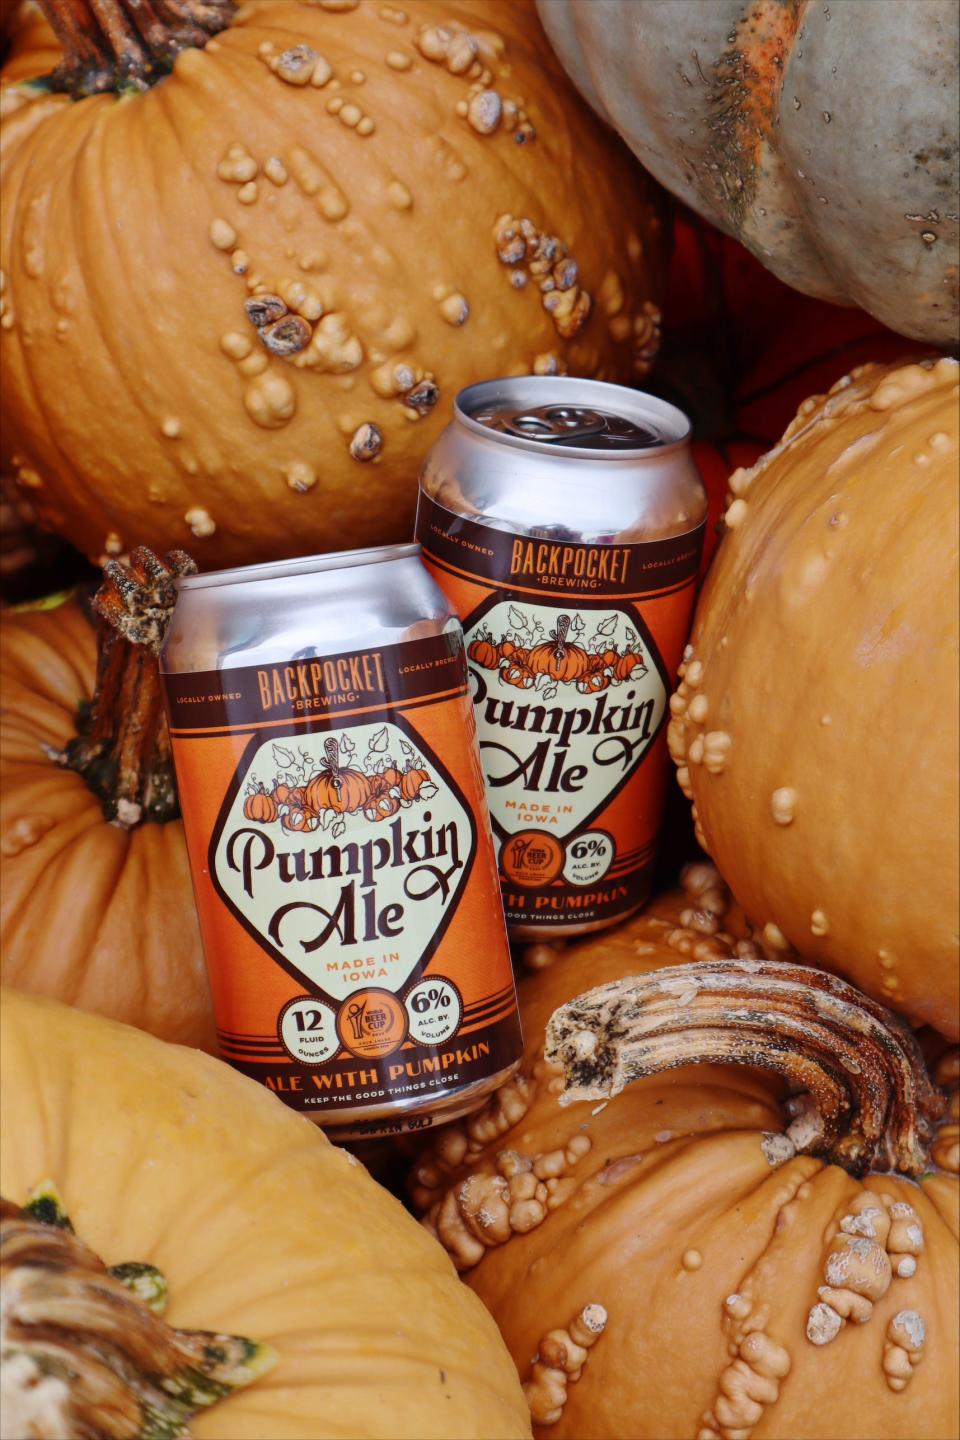 Backpocket Brewing's pumpkin ale is available for purchase at the Johnston taproom, Backpocket Pin & Pixel.